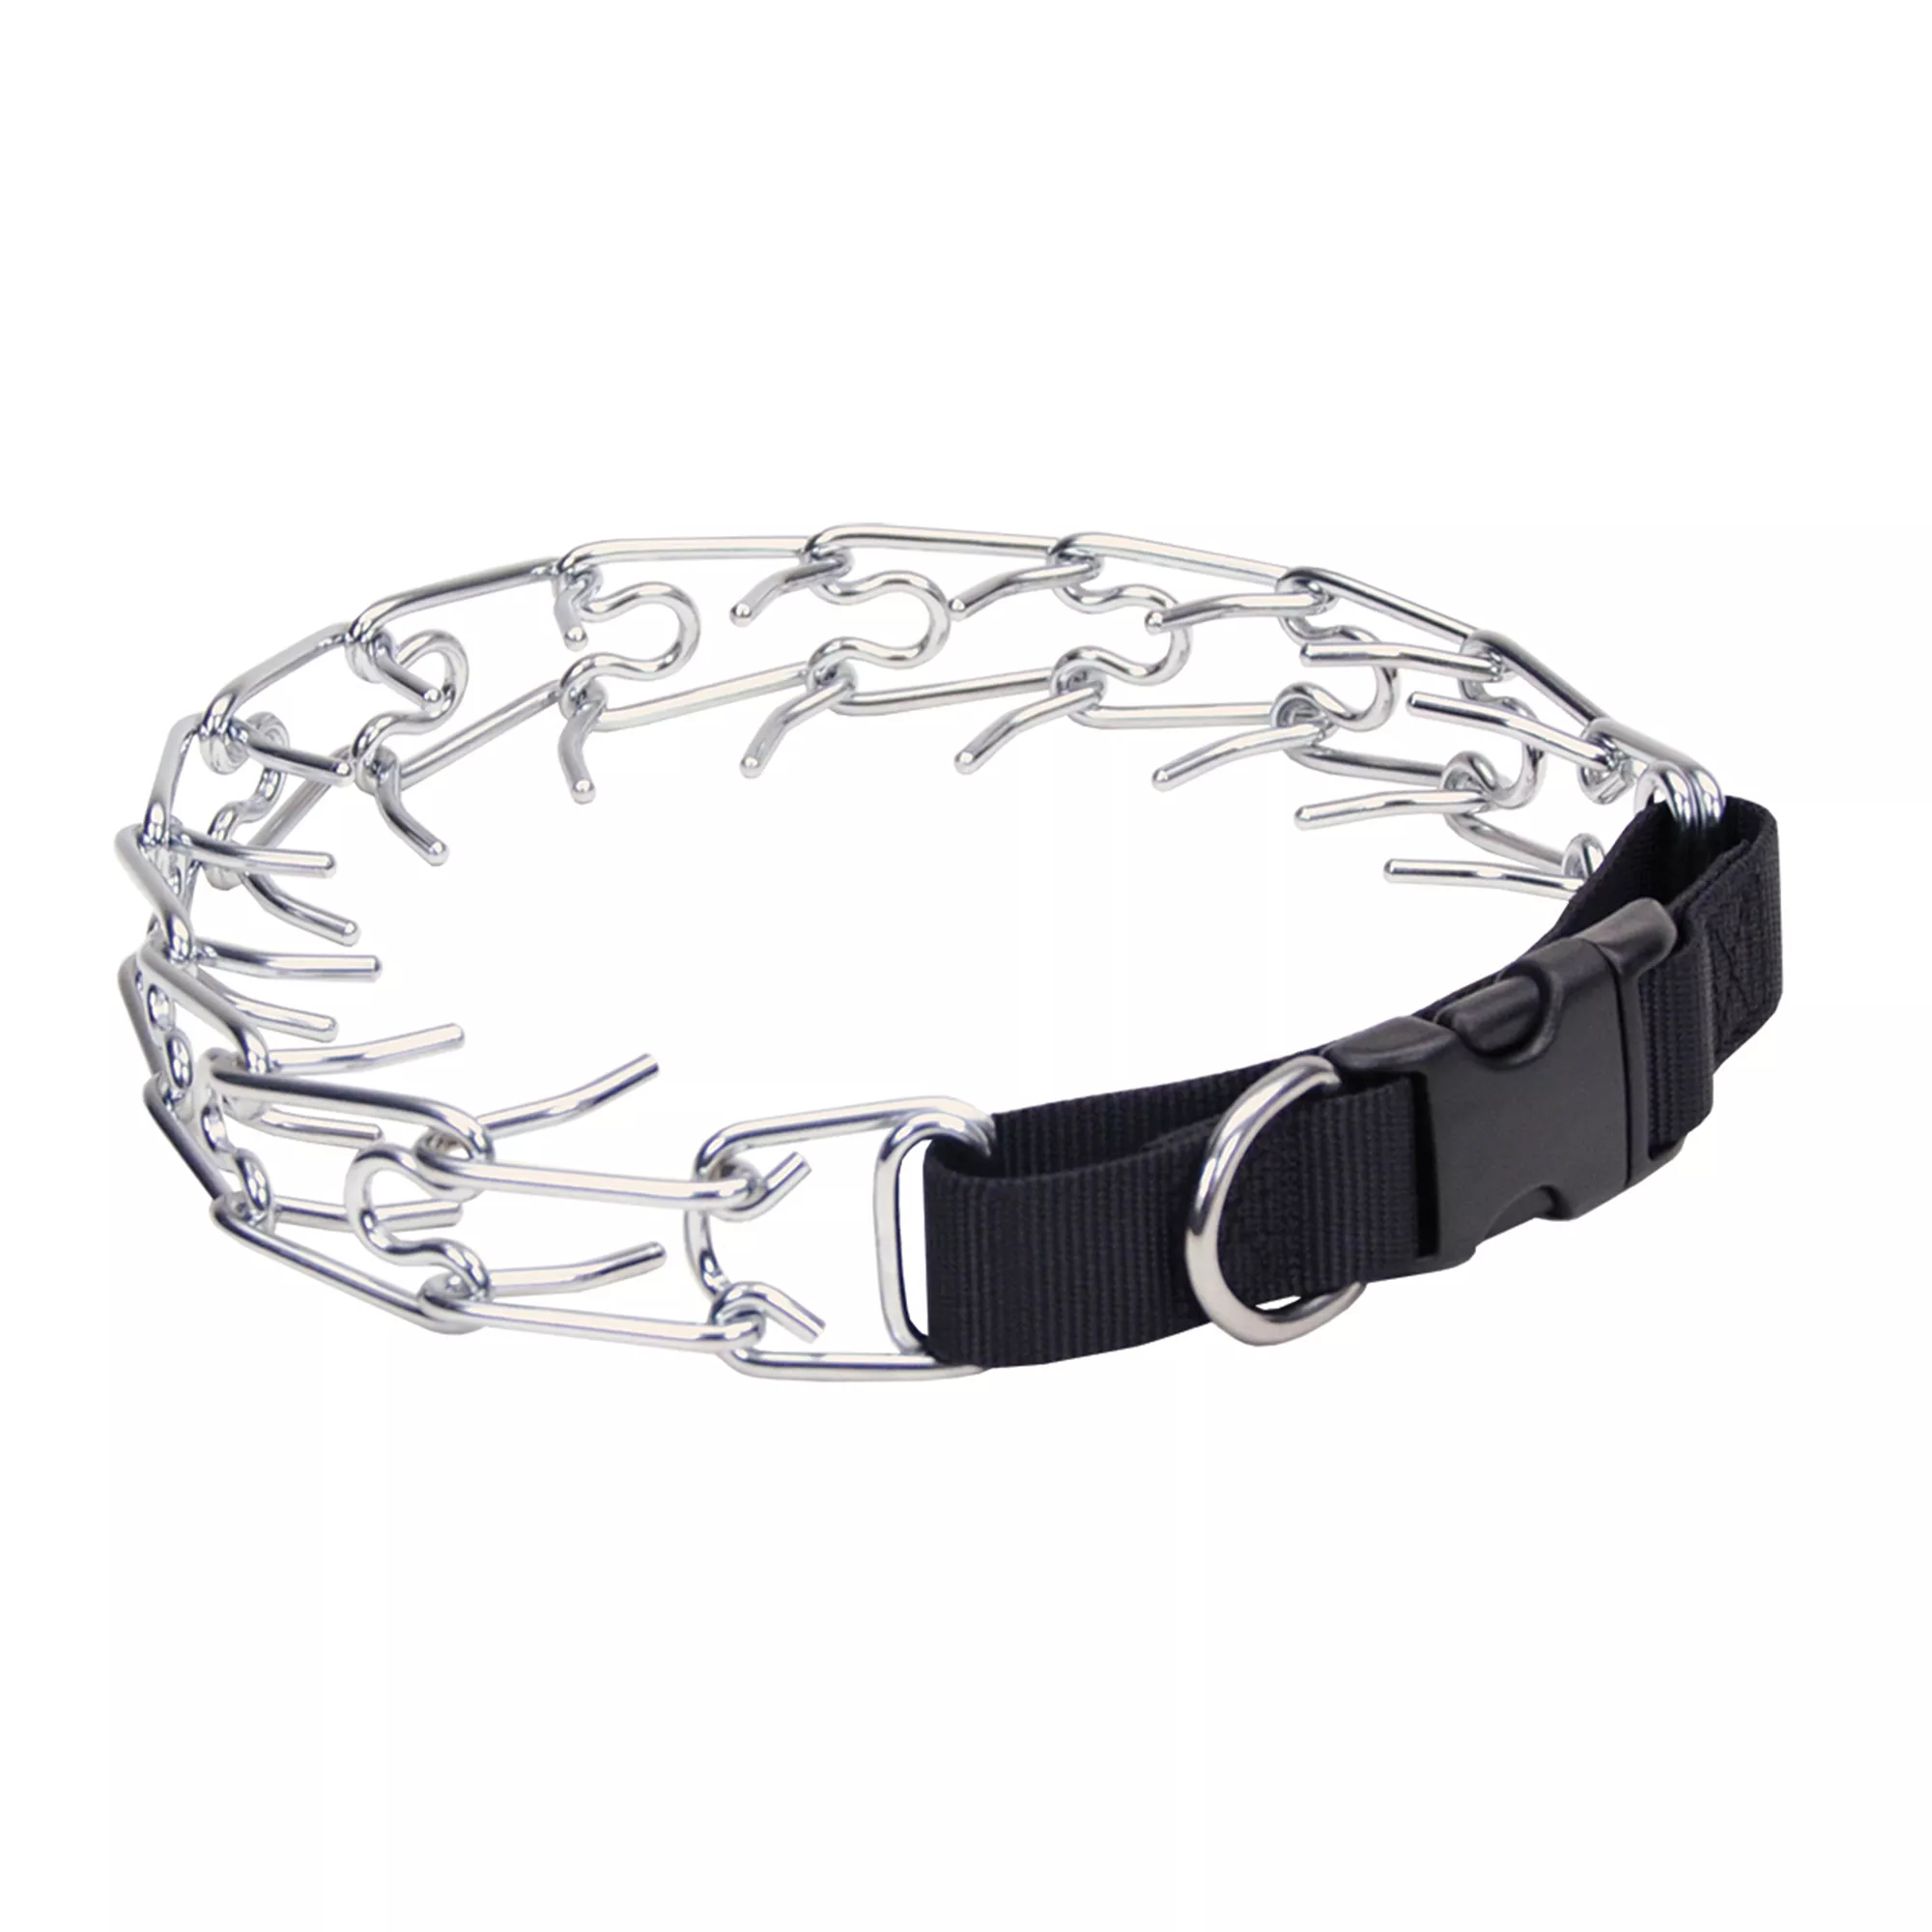 Dog Prong Training Collars: A Comprehensive Guide插图2